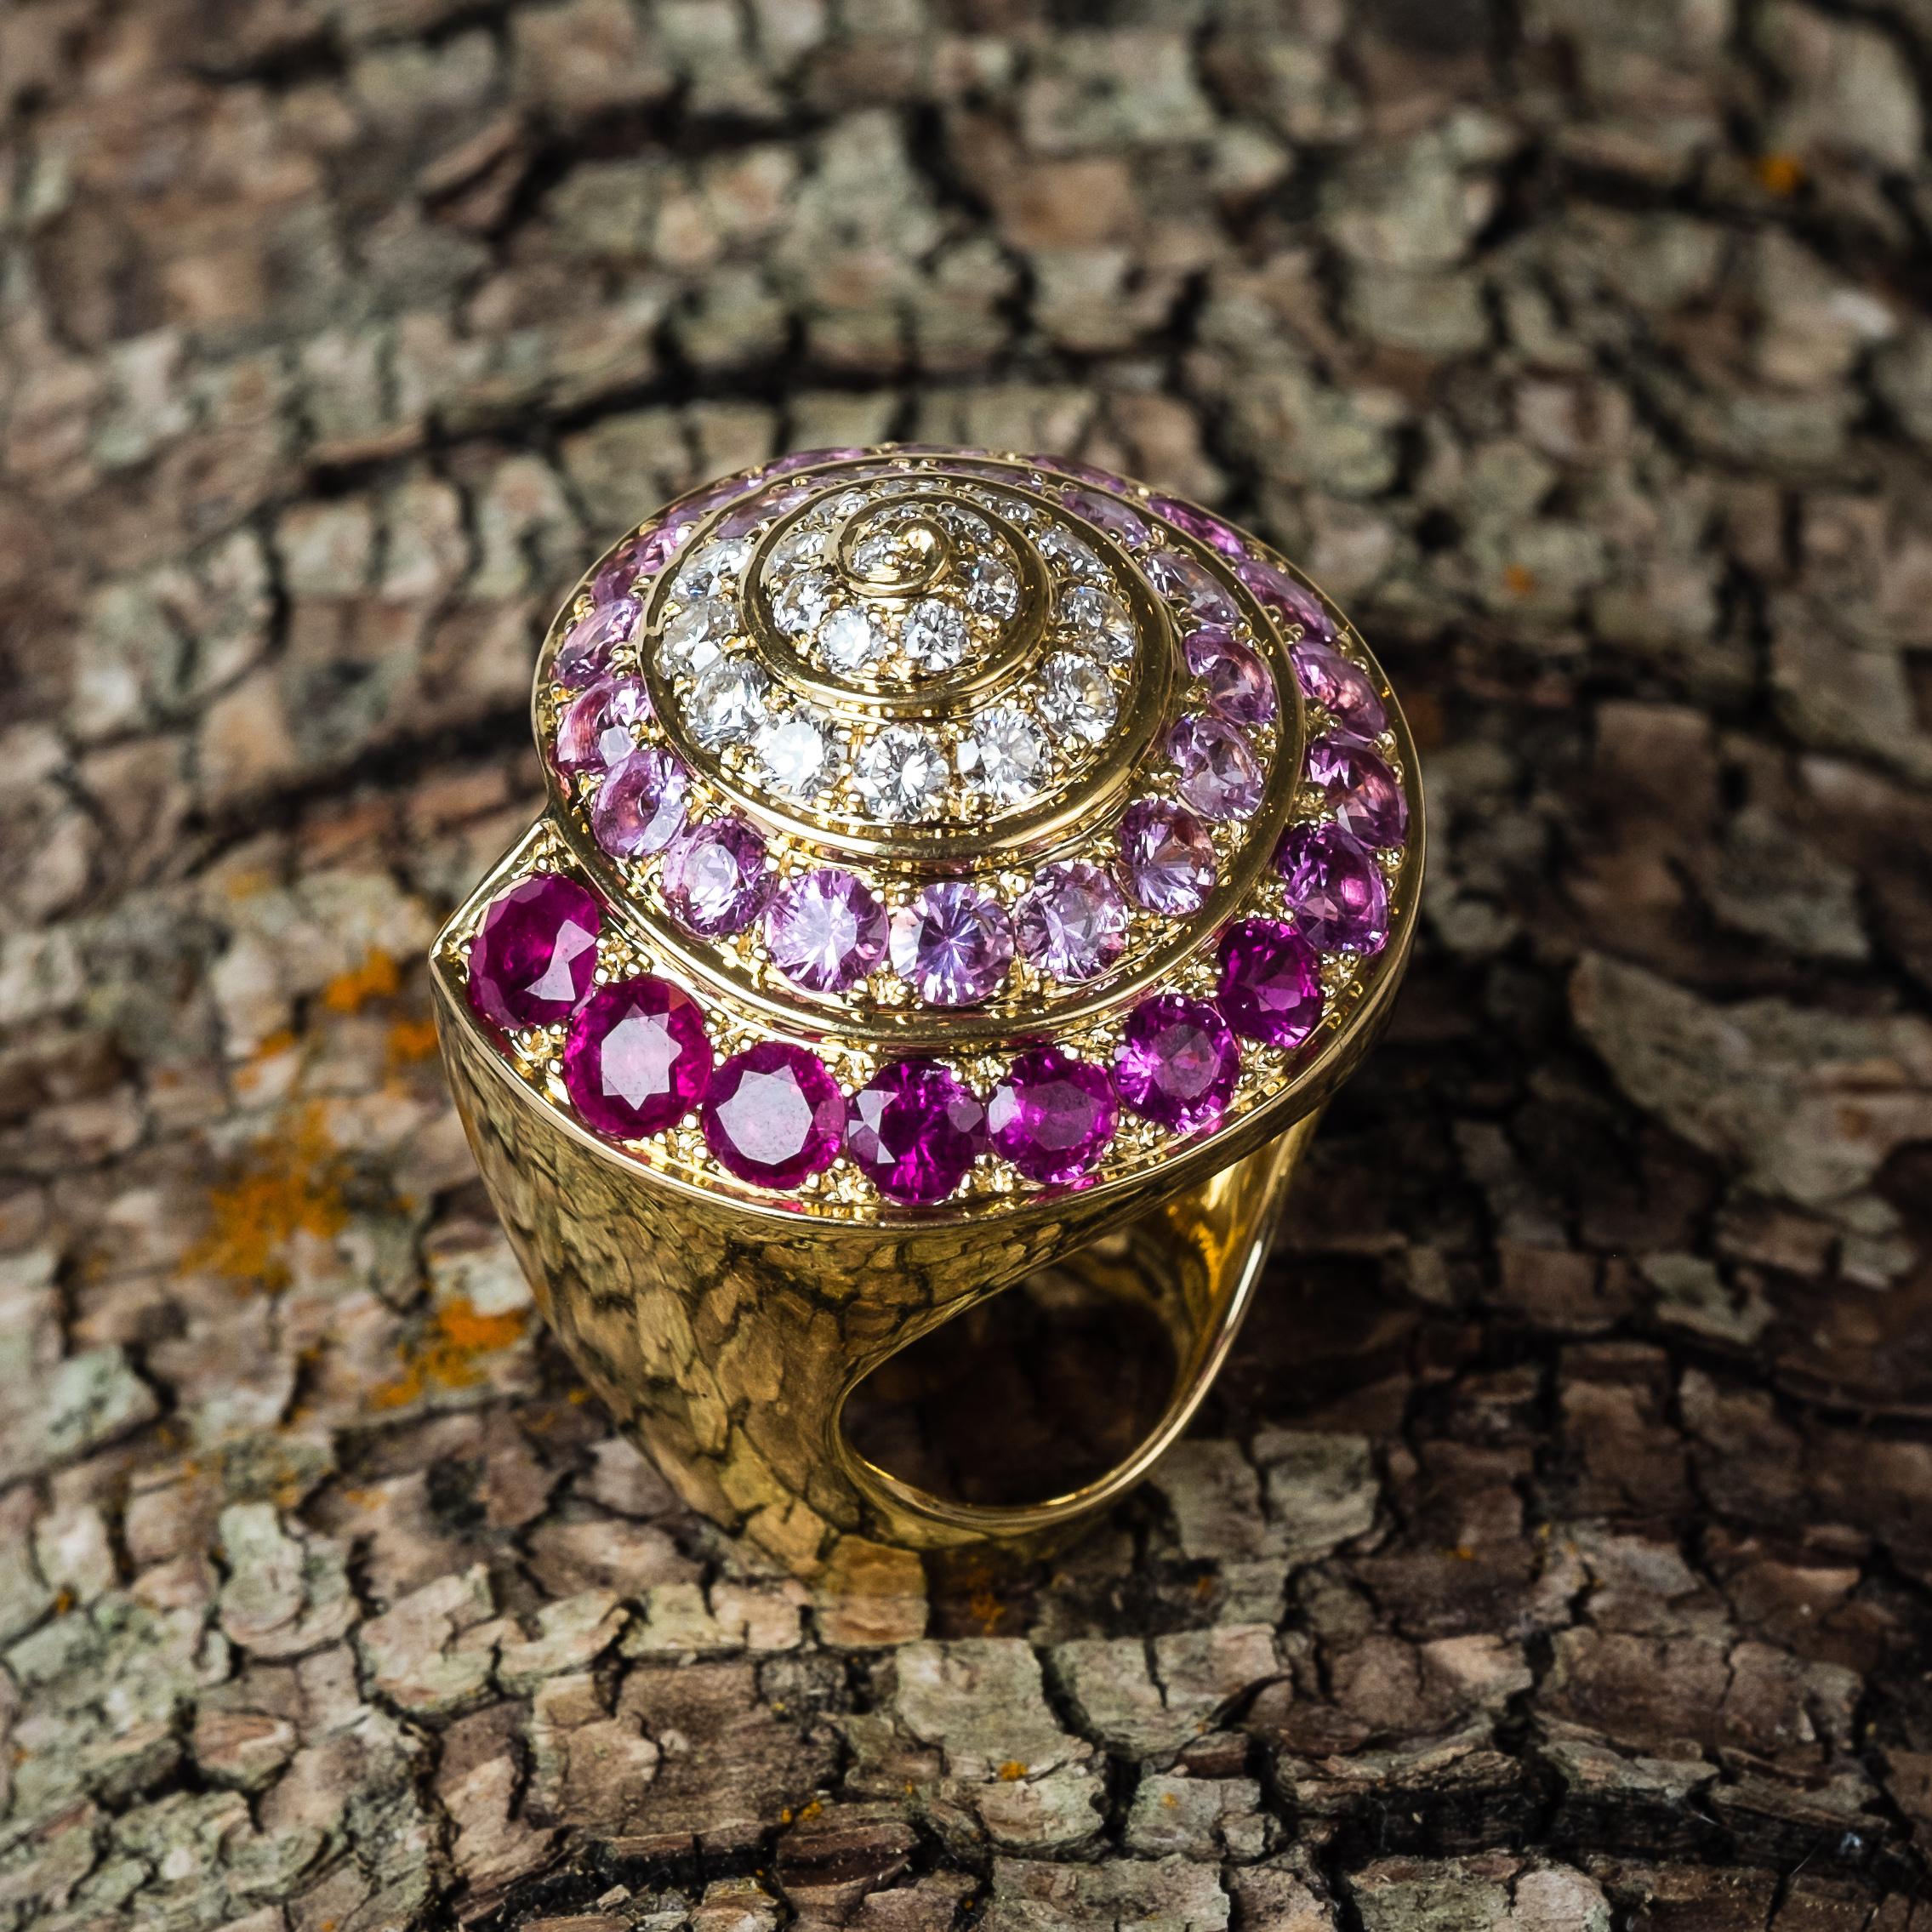 Designed as an ombré circular-cut ruby, pink sapphire and diamond shell ring, mounted in 18K gold.

Description:
Gem details: 20 circular-cut diamonds weigh approximately 0.82 cts., 7 circular-cut rubies weighing approximately 1.92 cts. and 25